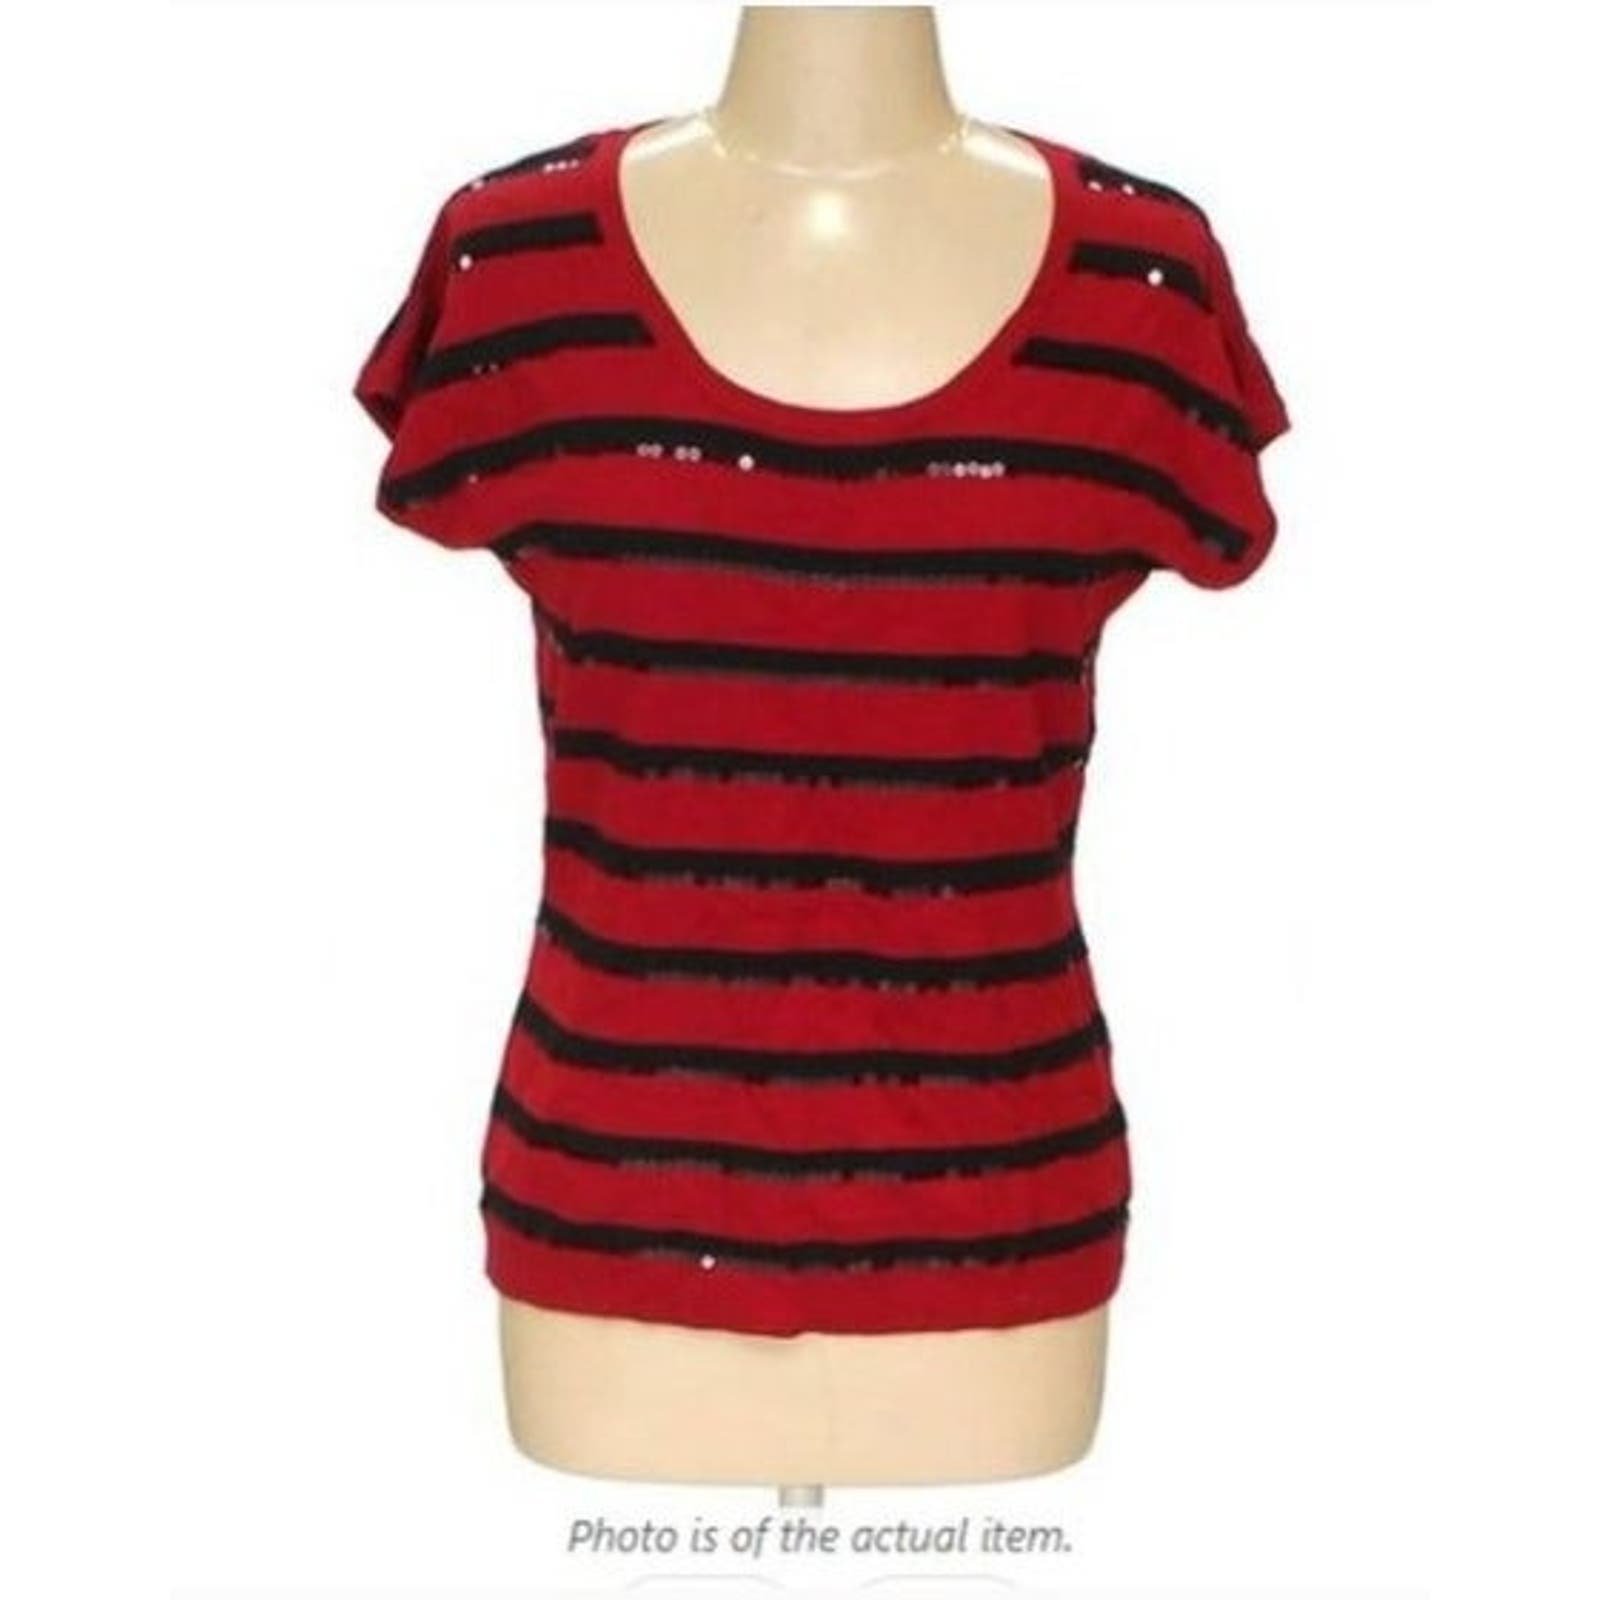 where to buy  REd and Black stripe Lark Lane Sweater si